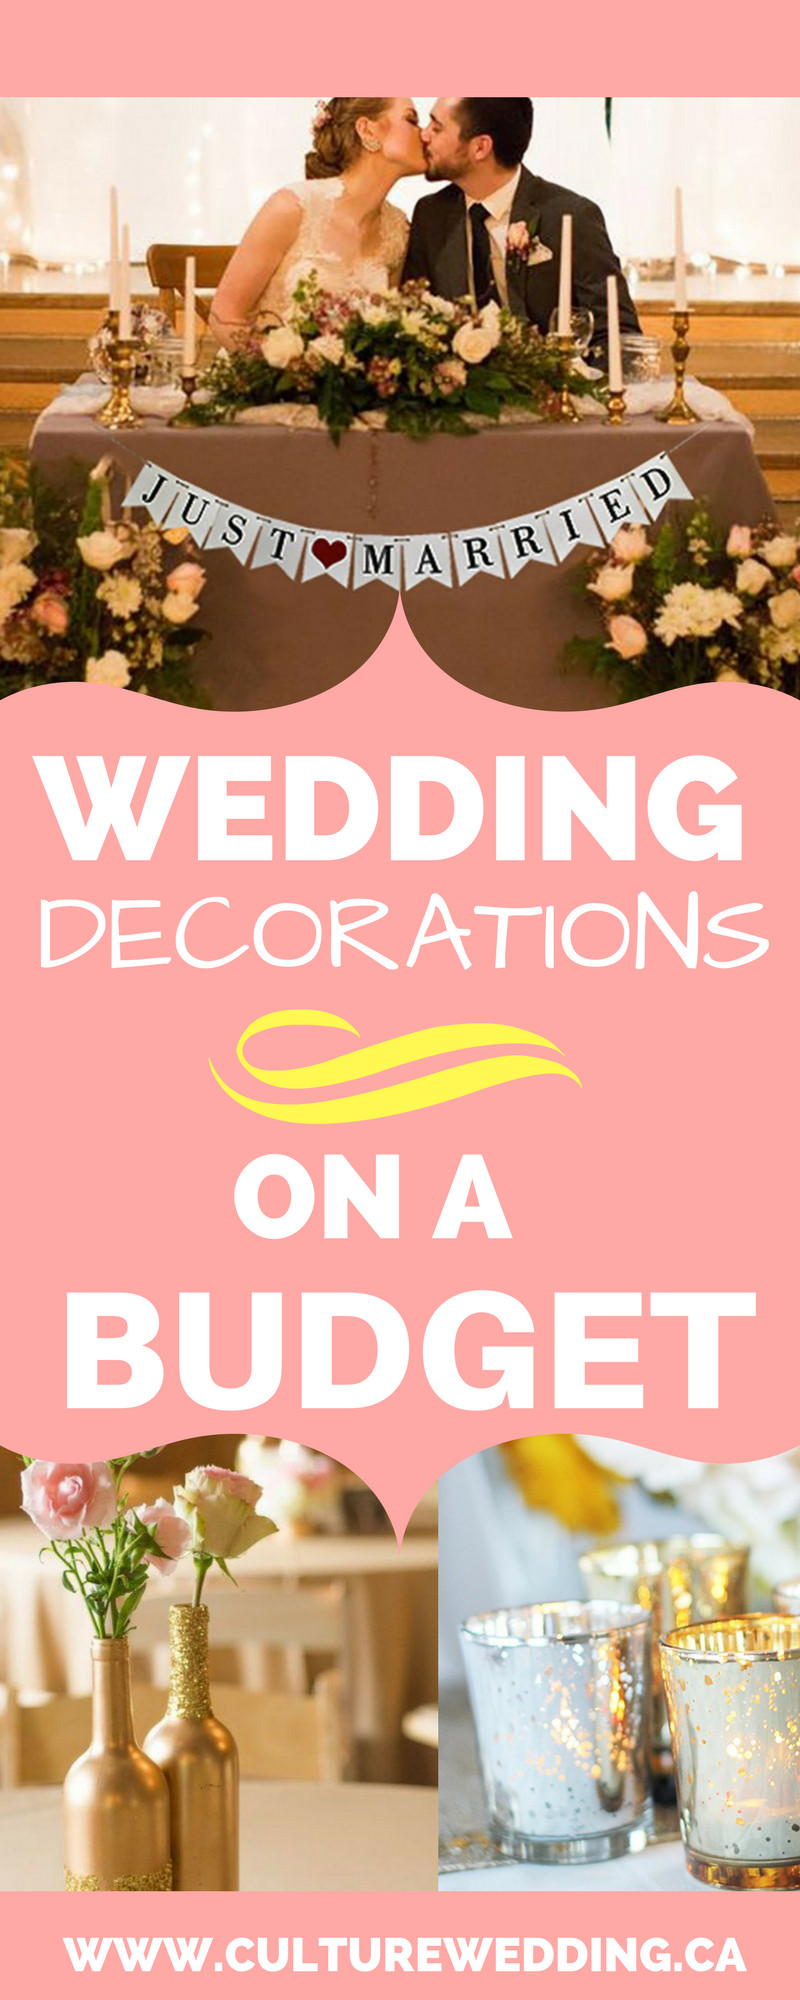 DIY Weddings On A Budget
 How to Wedding Decorations on a Bud Get them now